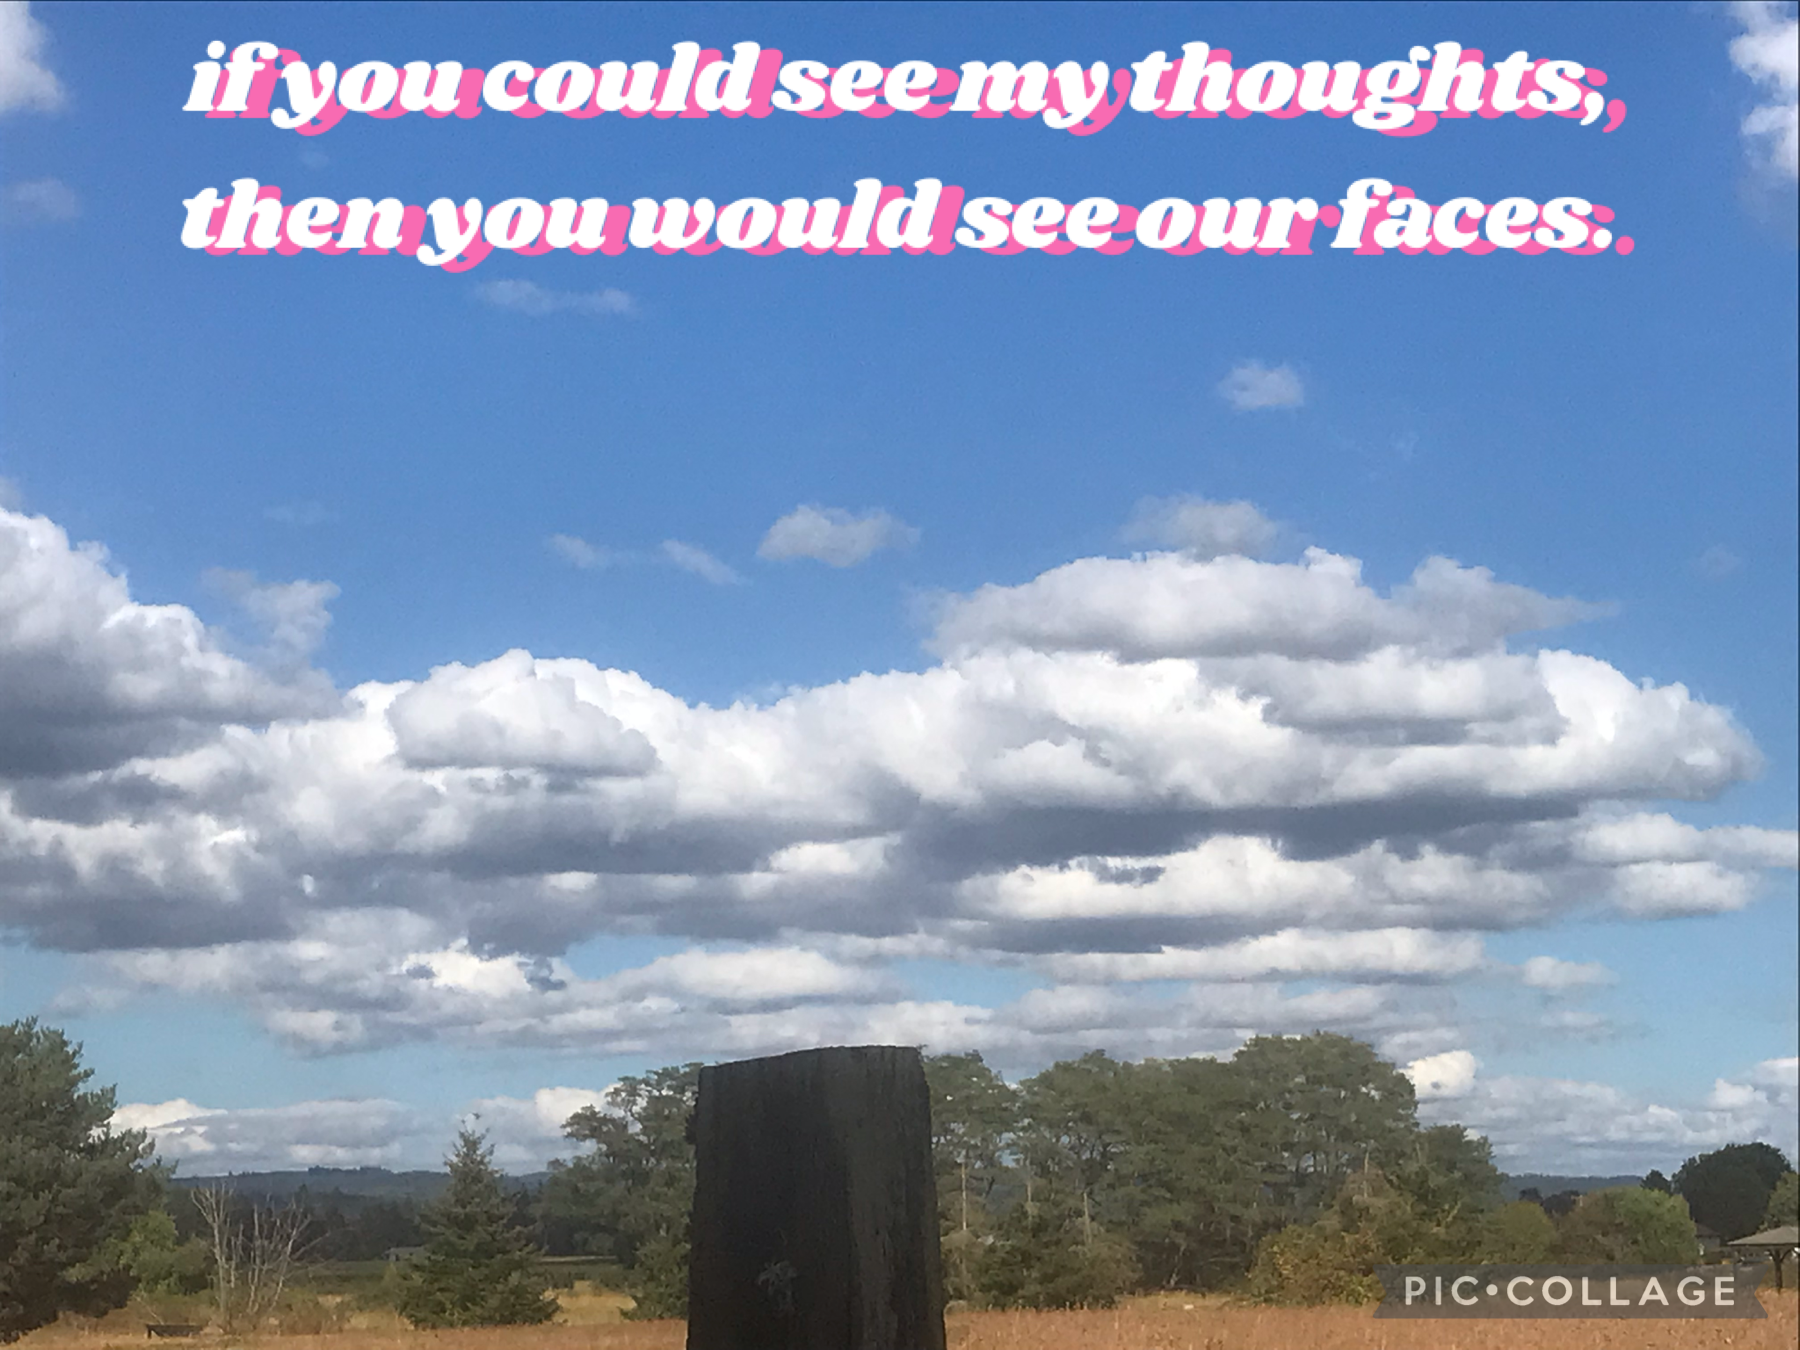 ☁️tap☁️
So this is kinda thrown together lol
It’s a pic I took of the sky on a partly cloudy day and I found the random quote on google so yeah that’s the story of my life😶✌🏼